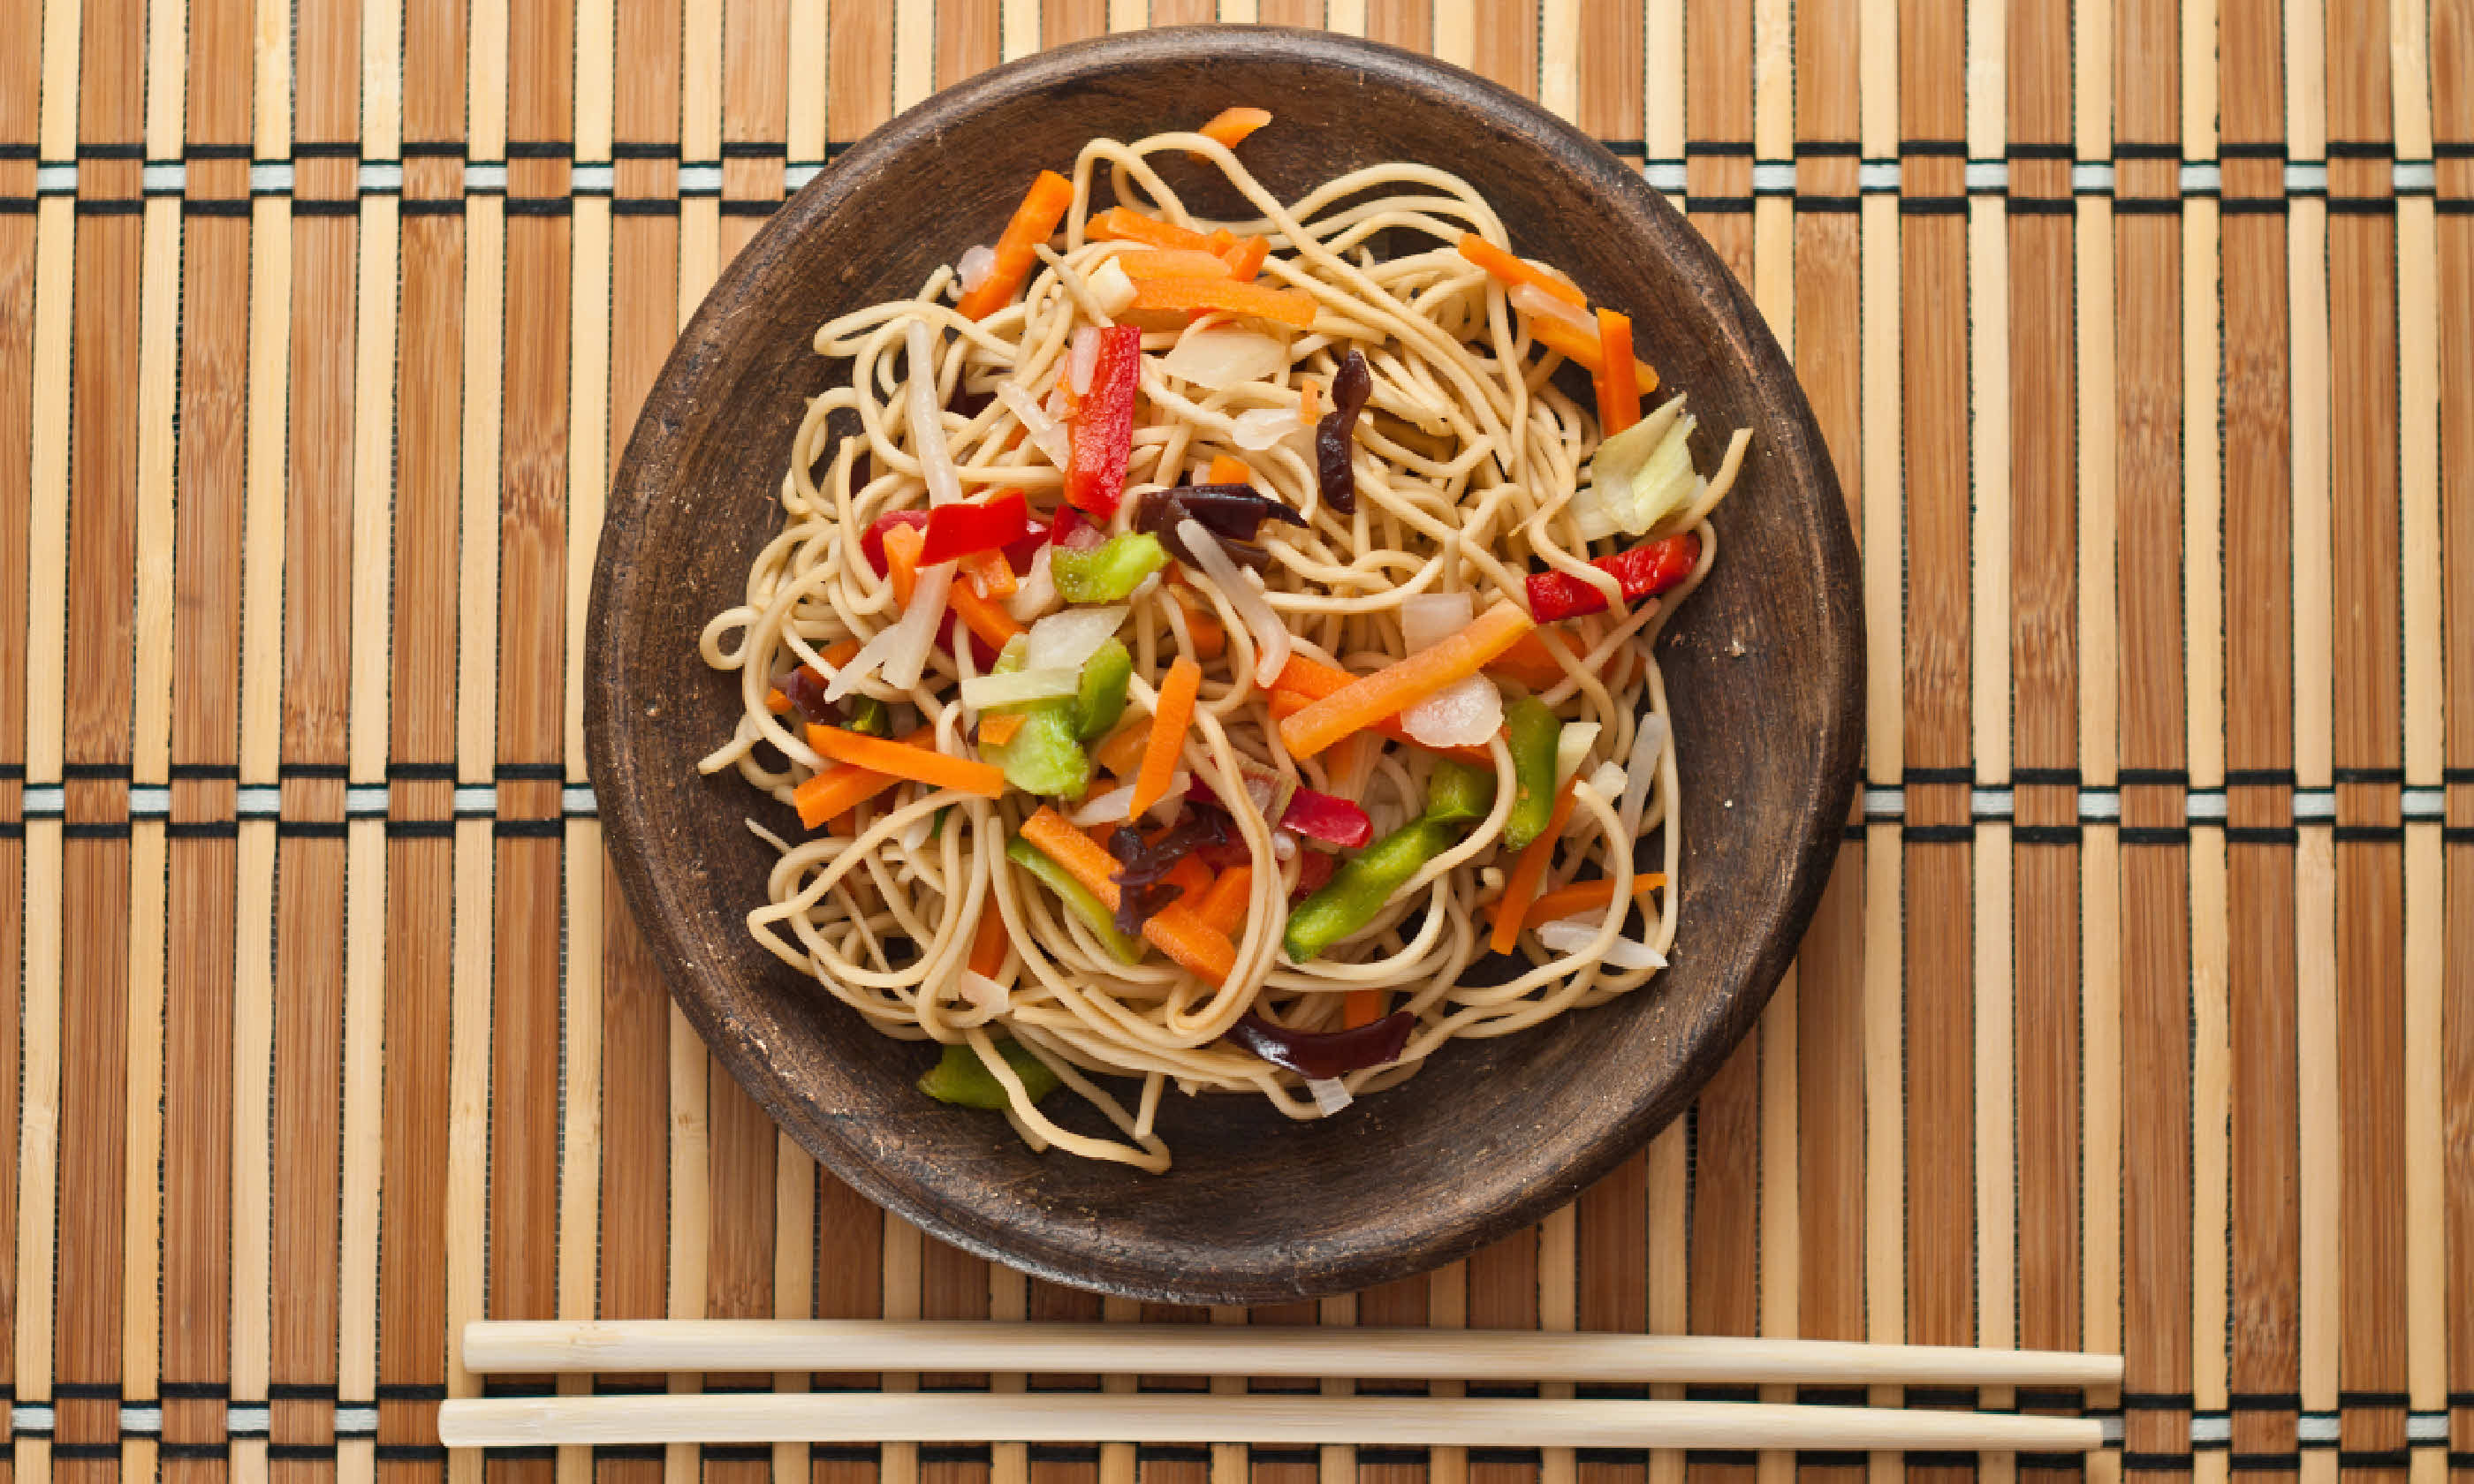 China noodles with vegetables (Shutterstock)